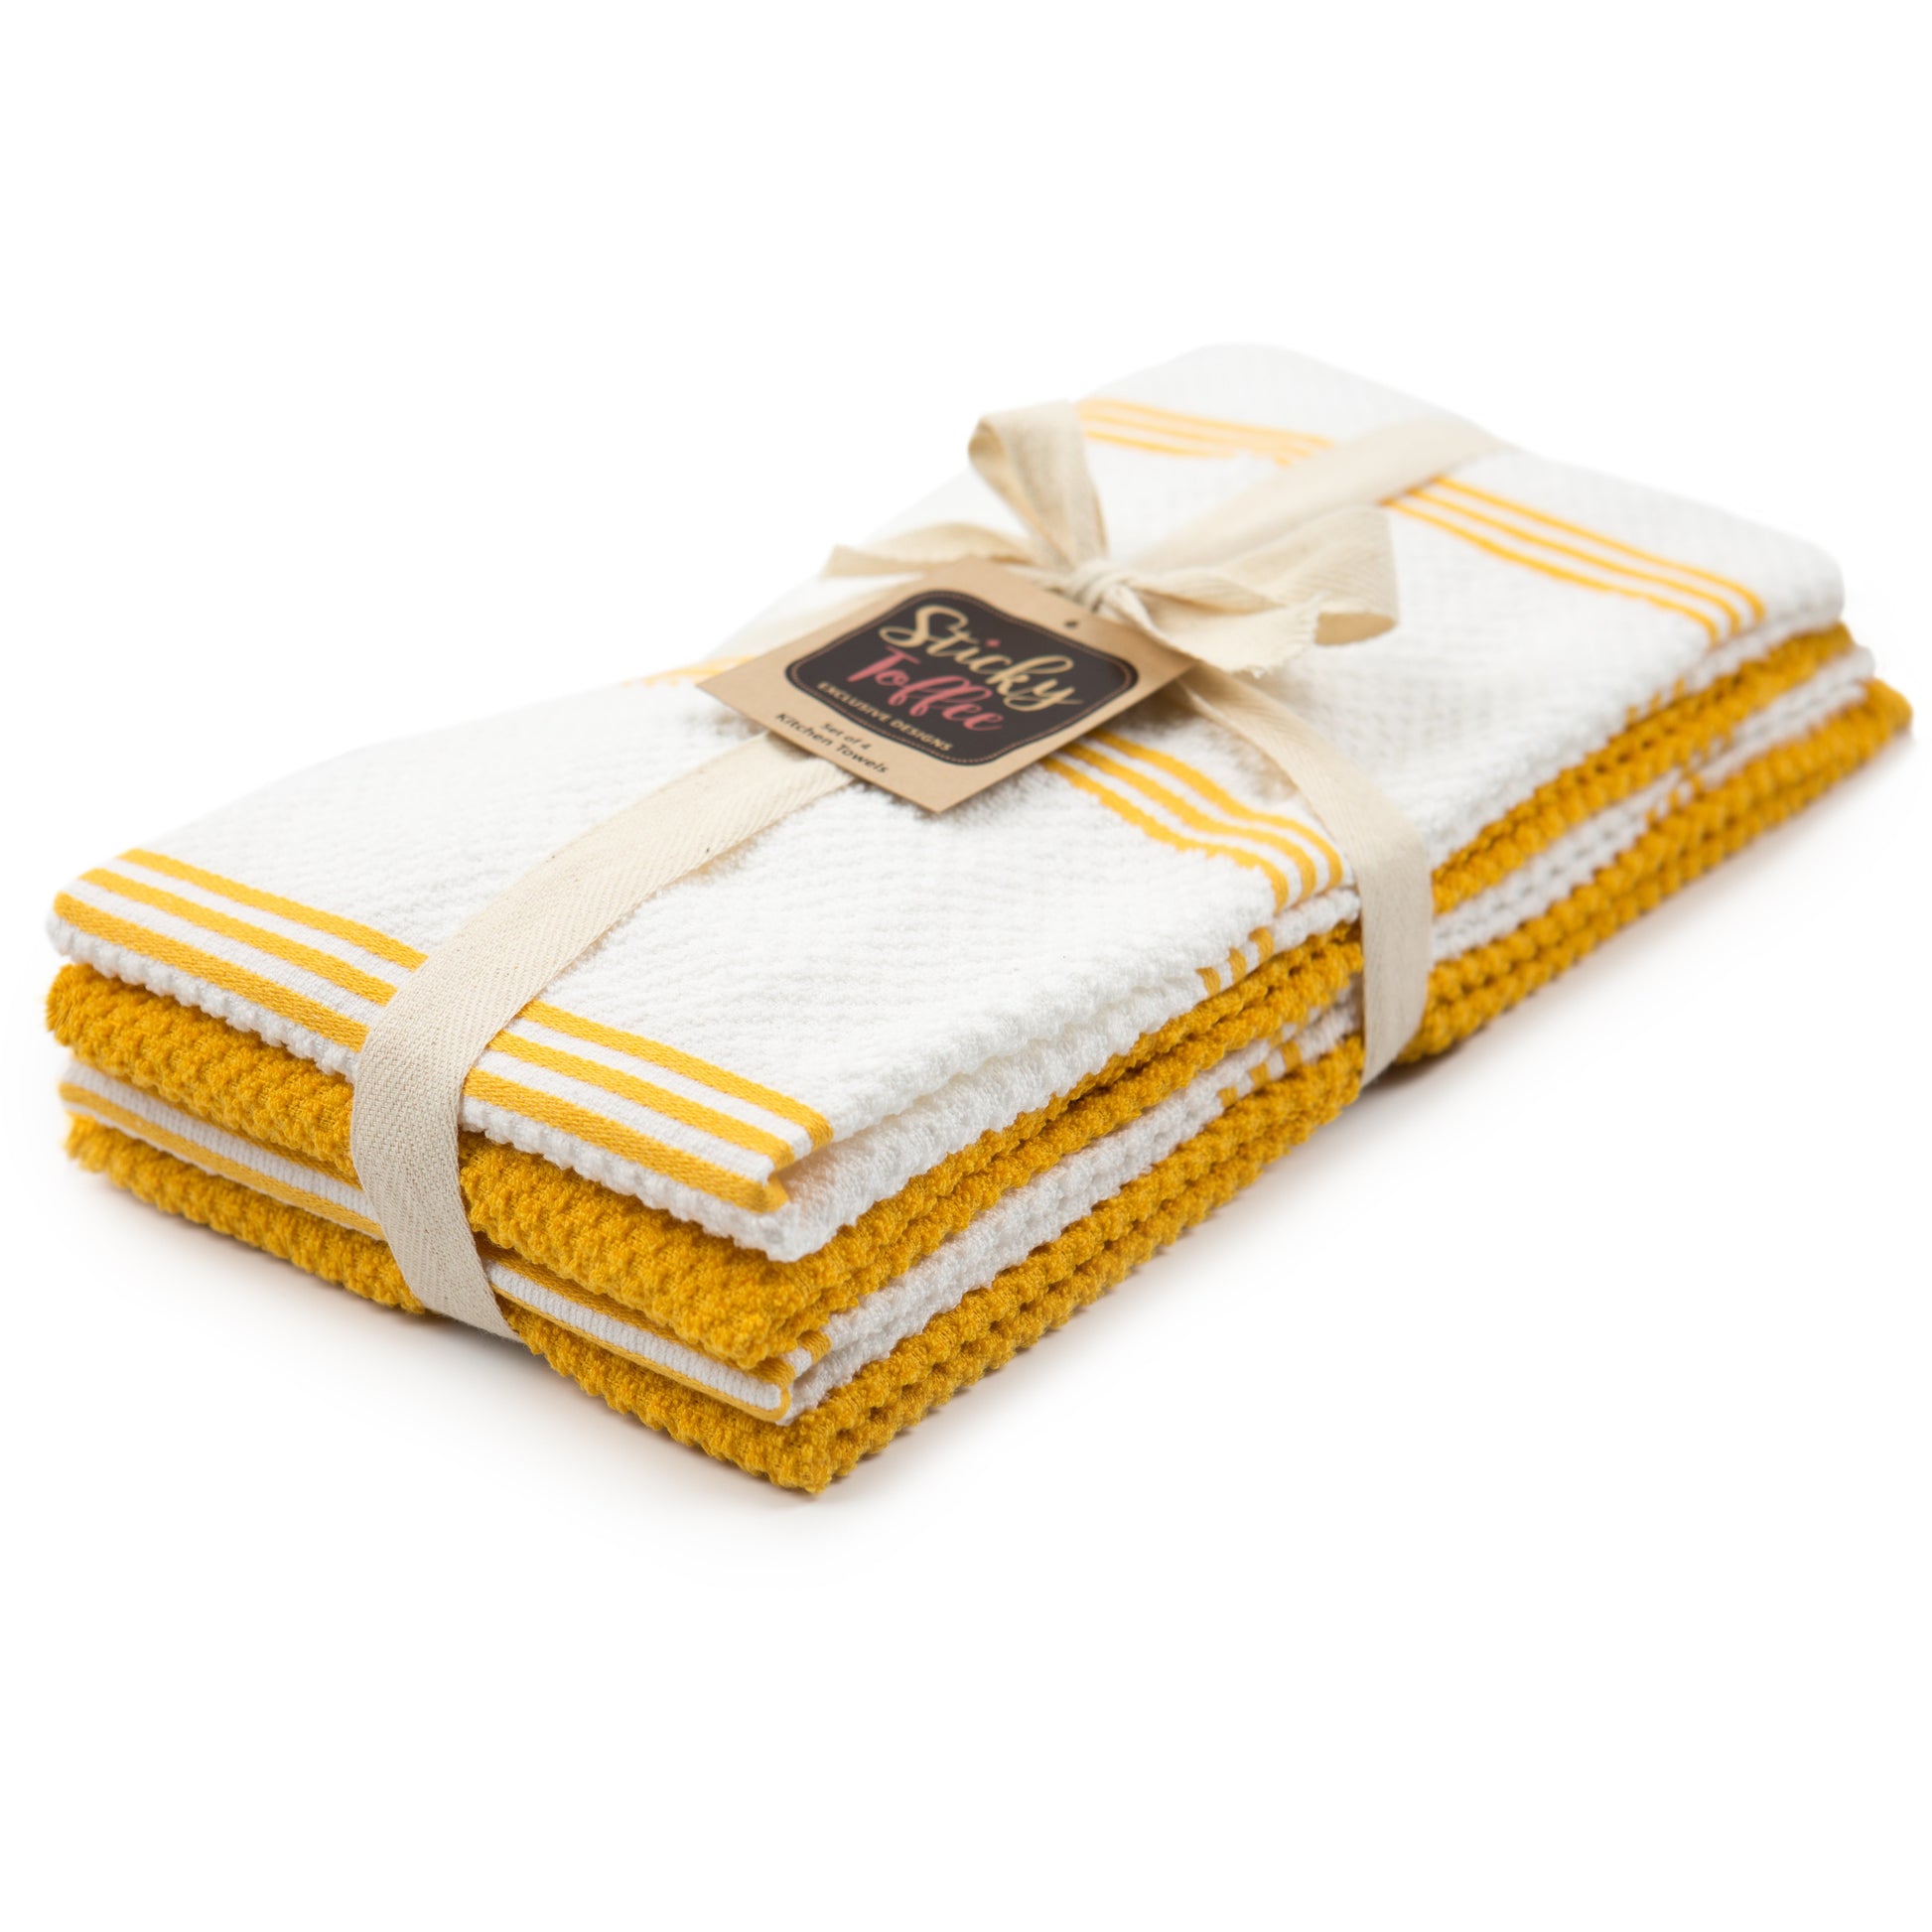 Sticky Toffee Oeko-Tex Certified Dish Towels, 4-Pack